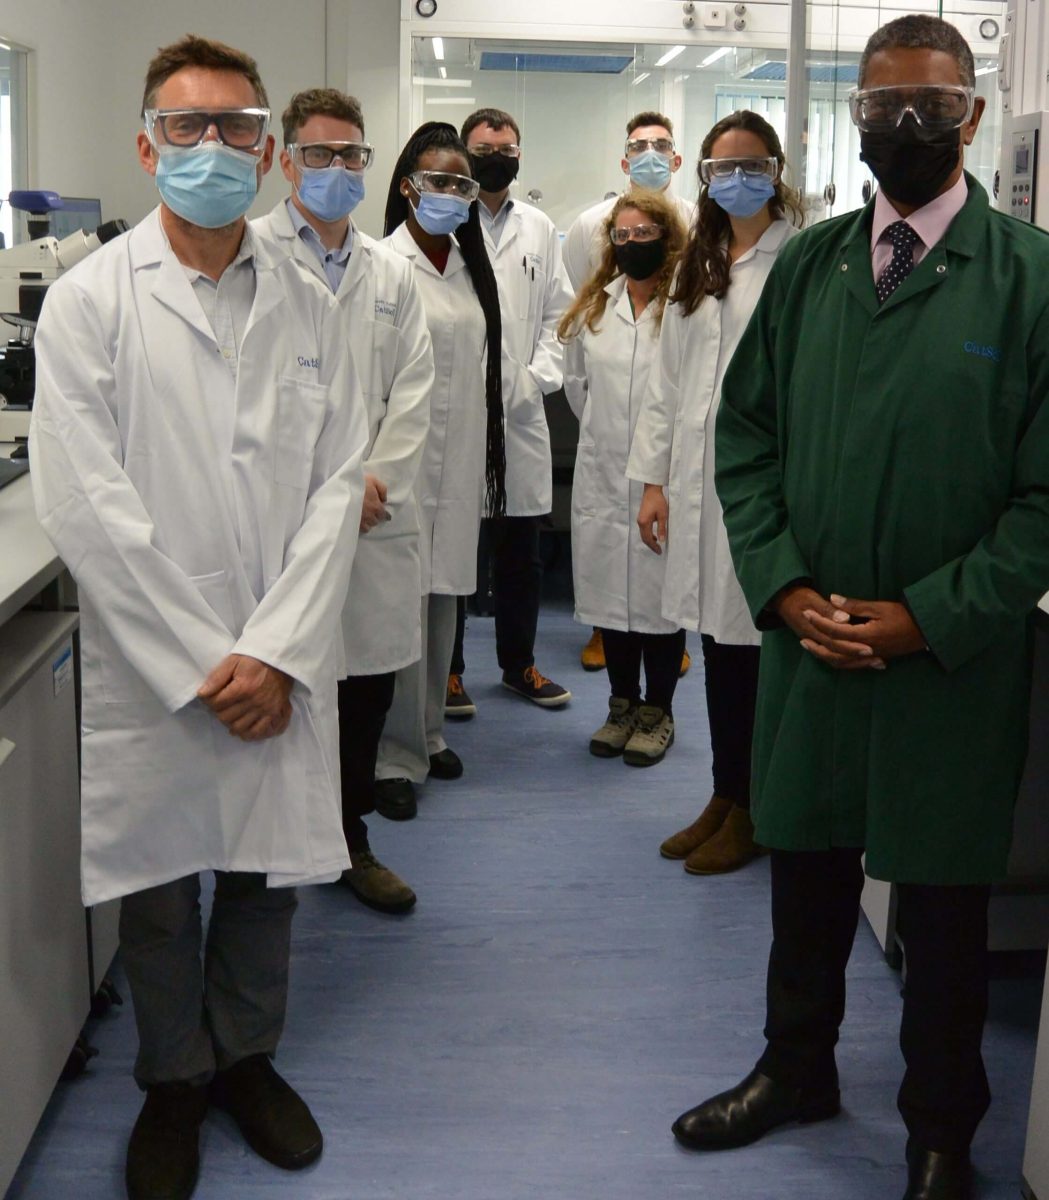 Welsh Minister of Economy opens CatSci’s New Material Science Laboratory